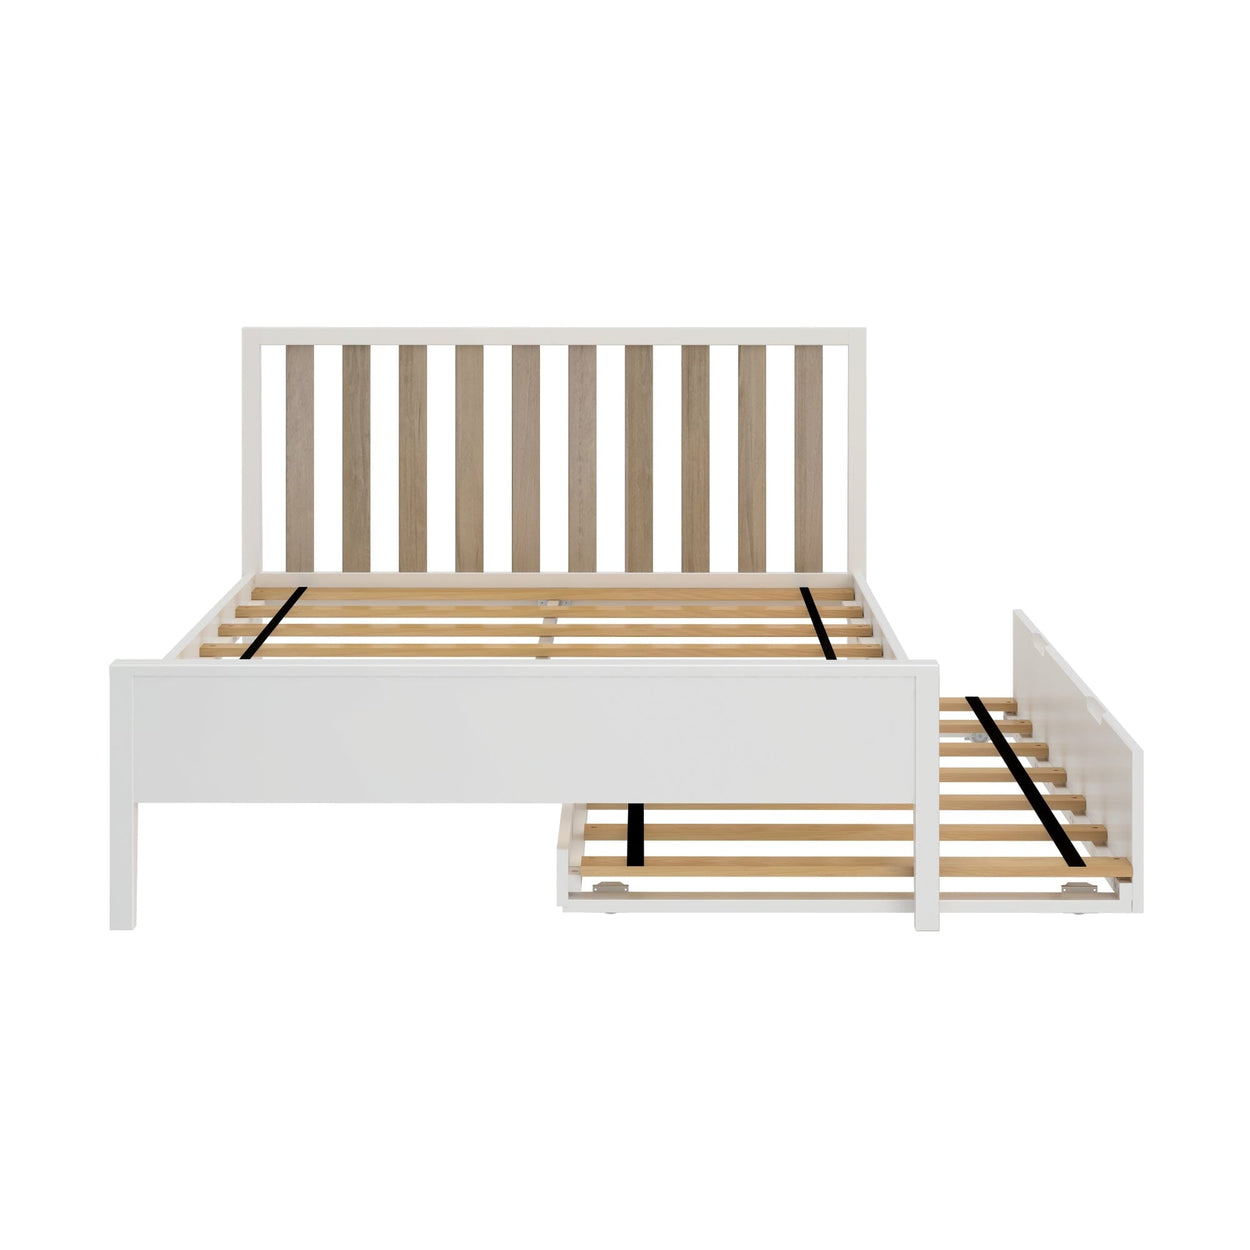 216211-202 : Kids Beds Scandinavian Full-Size Bed with Twin-Size Trundle, White/Blonde